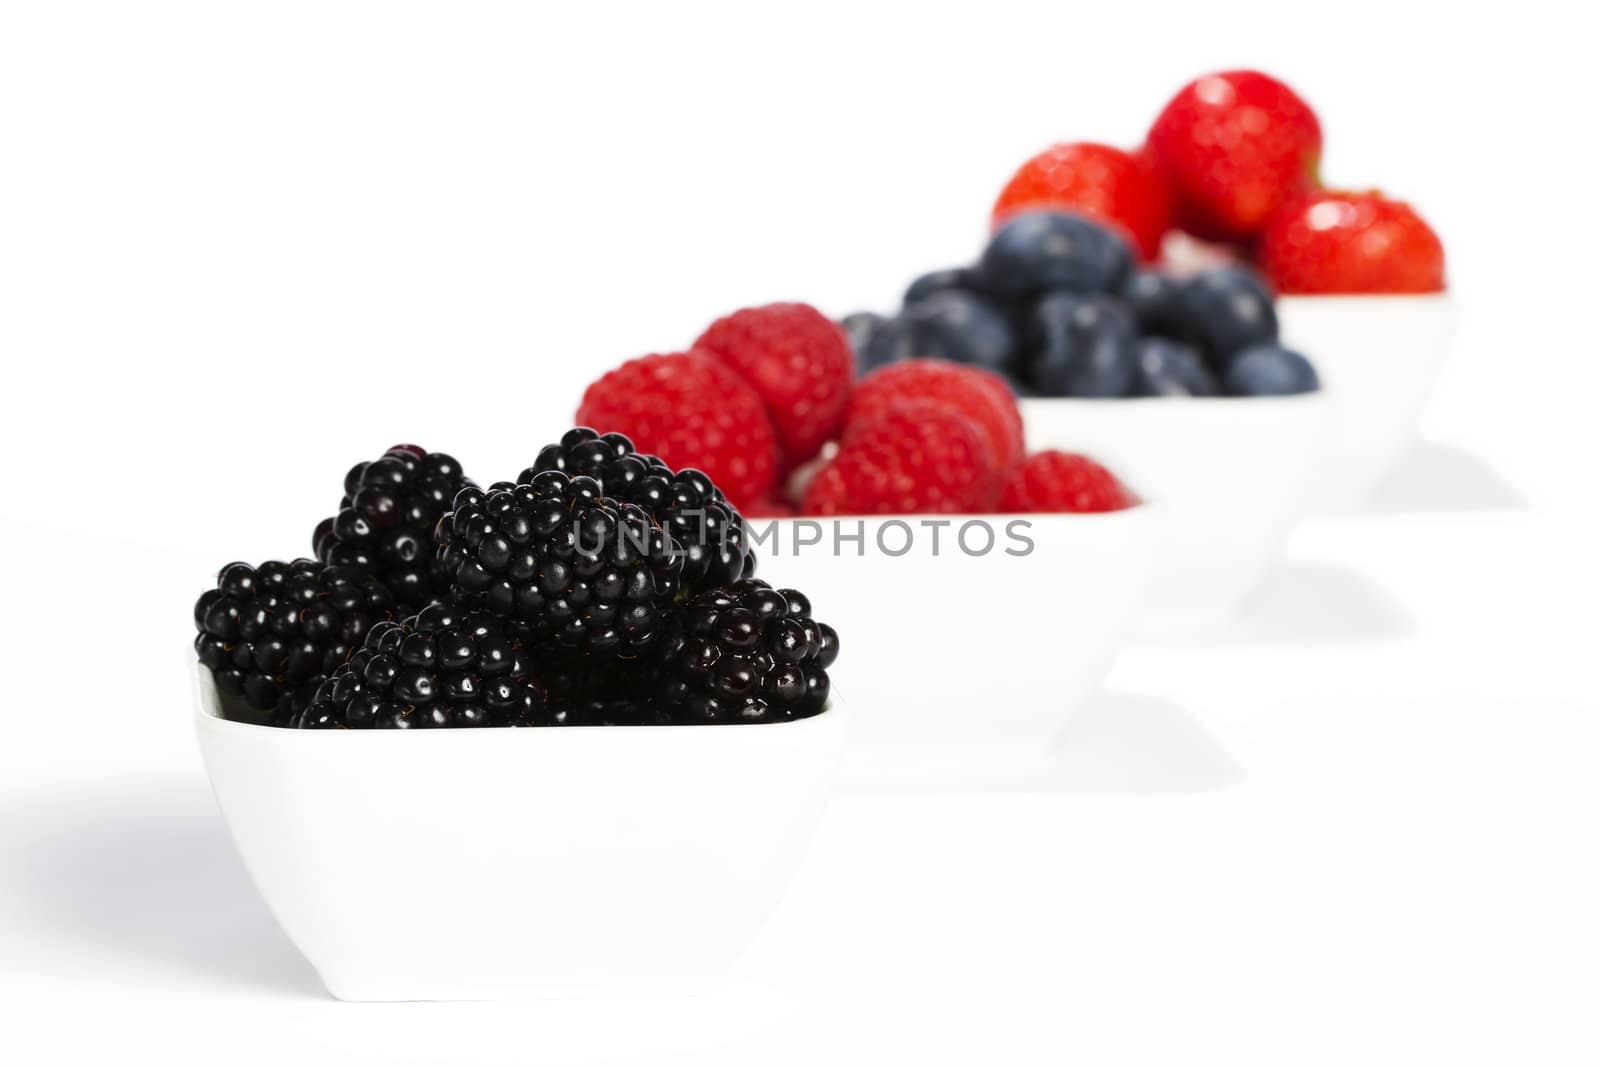 some bowls filled with wild berries on white background blackberries in front